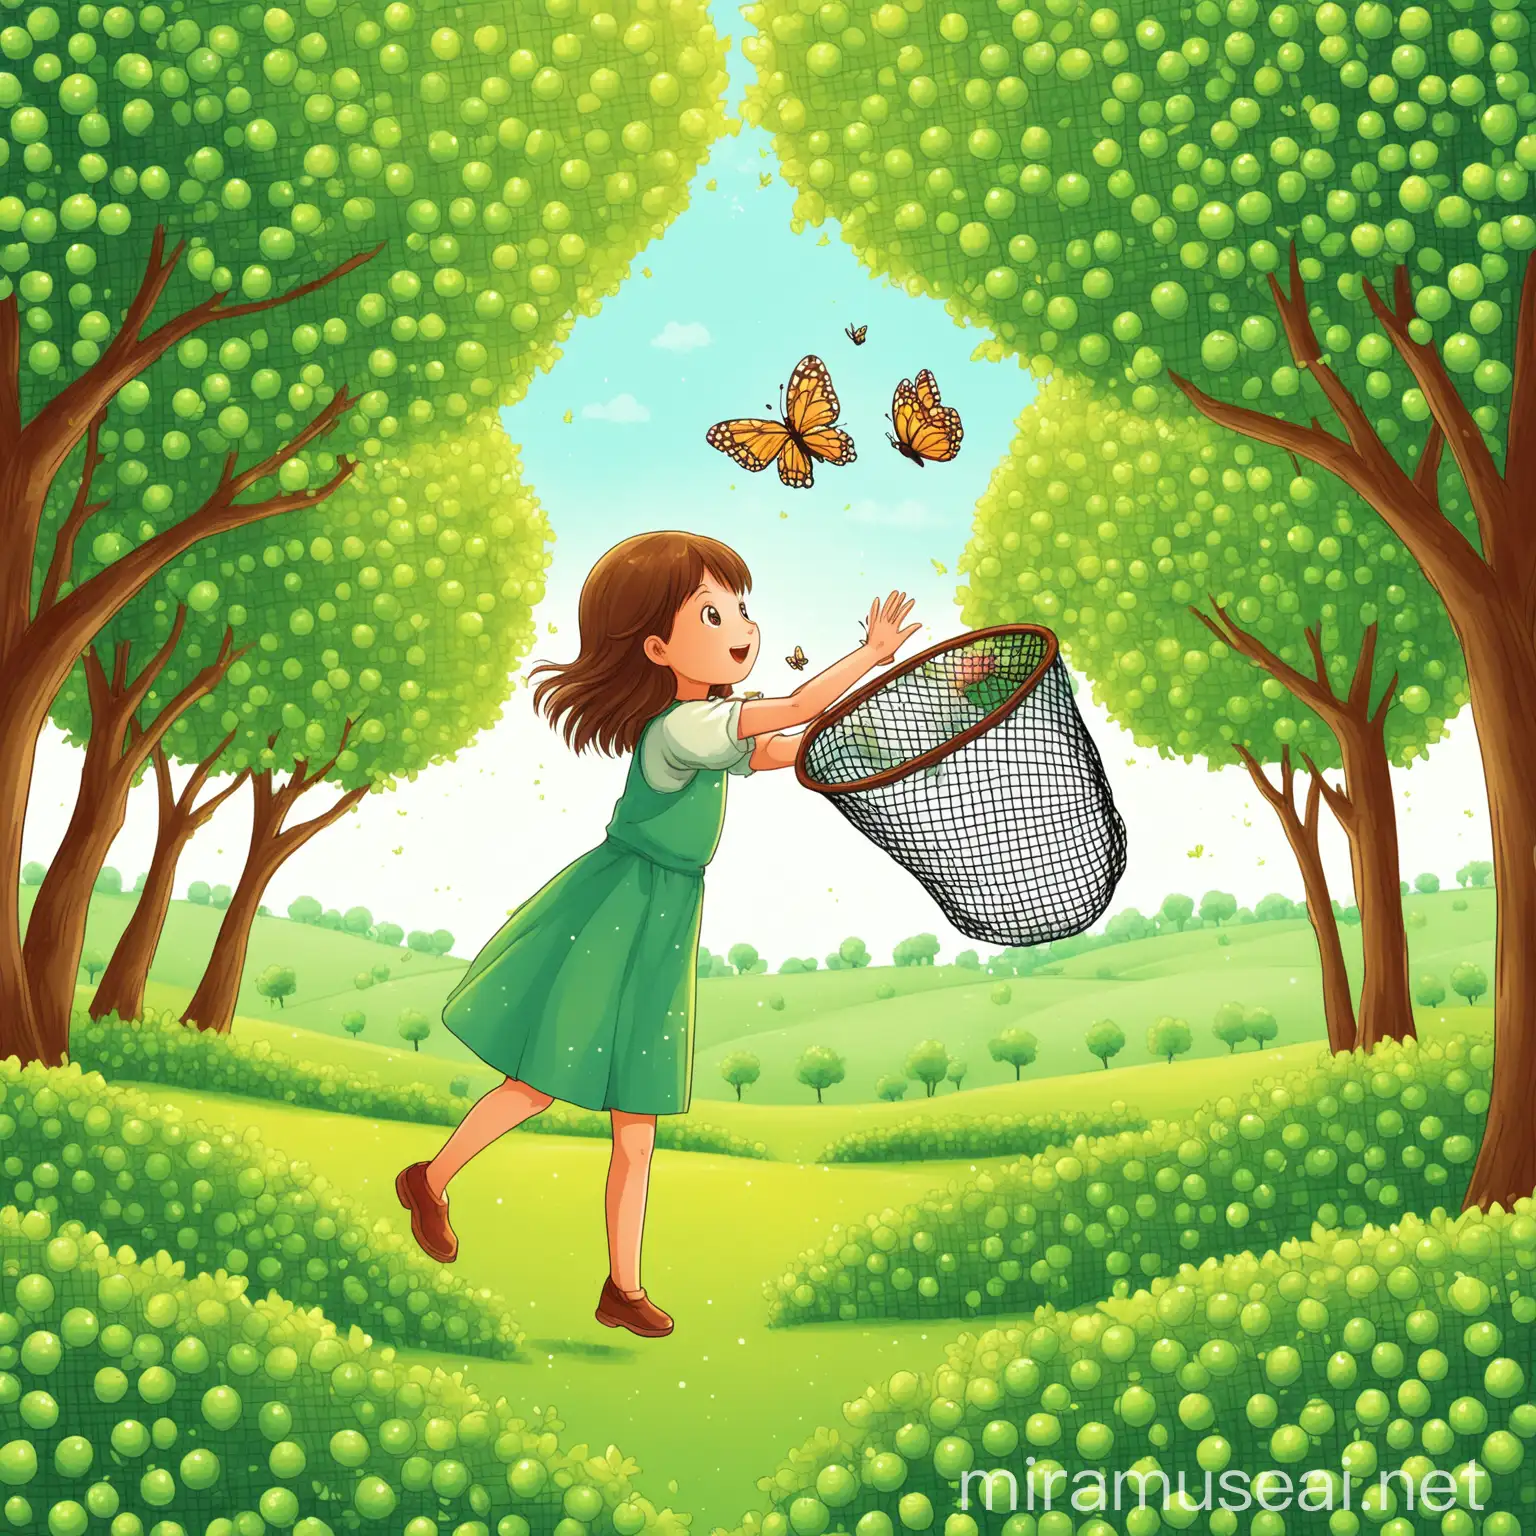 Girl Catching Butterfly in Lush Orchard Children Book Style Illustration